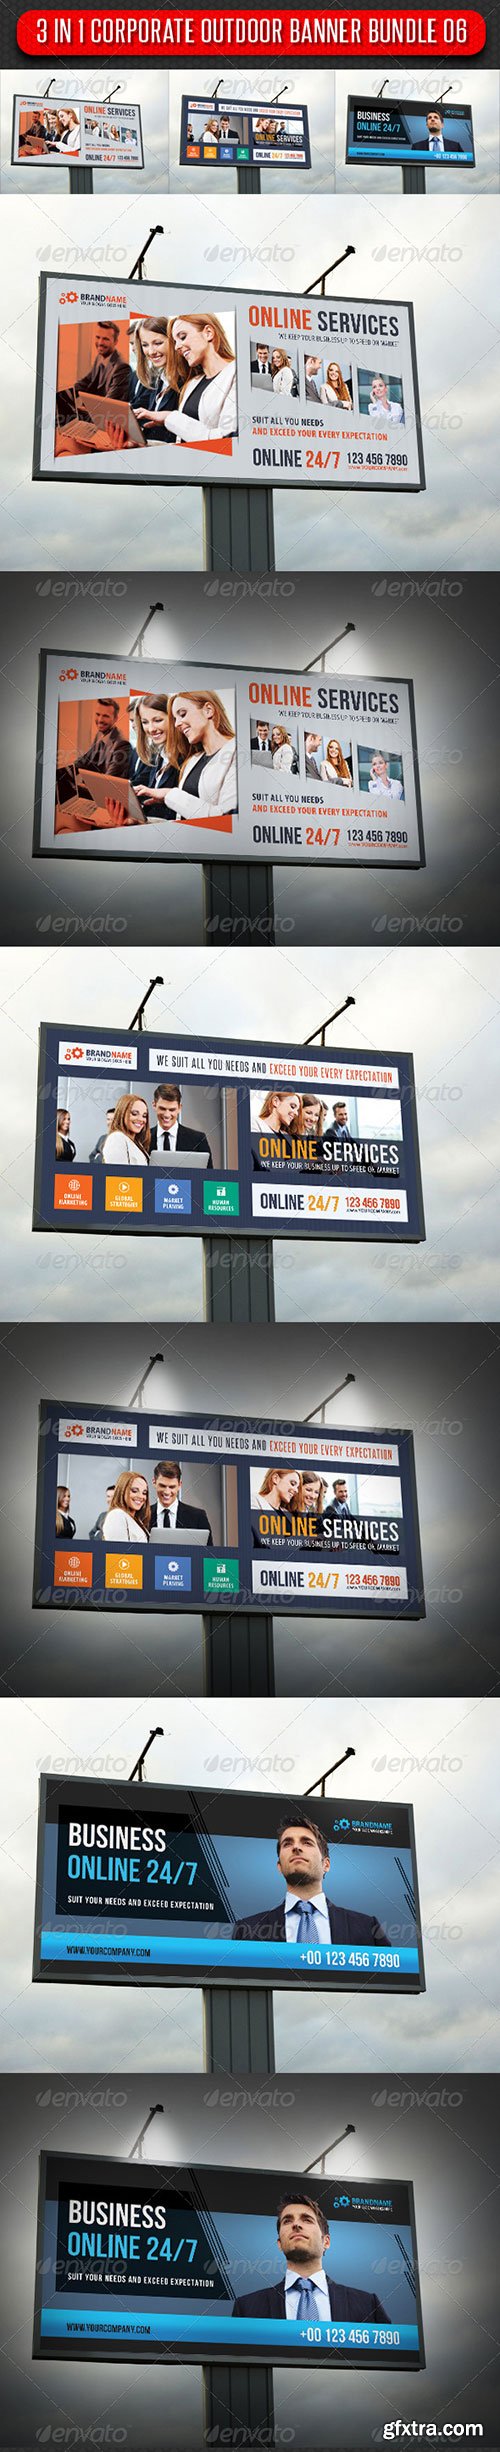 Graphicriver - 3 in 1 Corporate Outdoor Banner Bundle 07